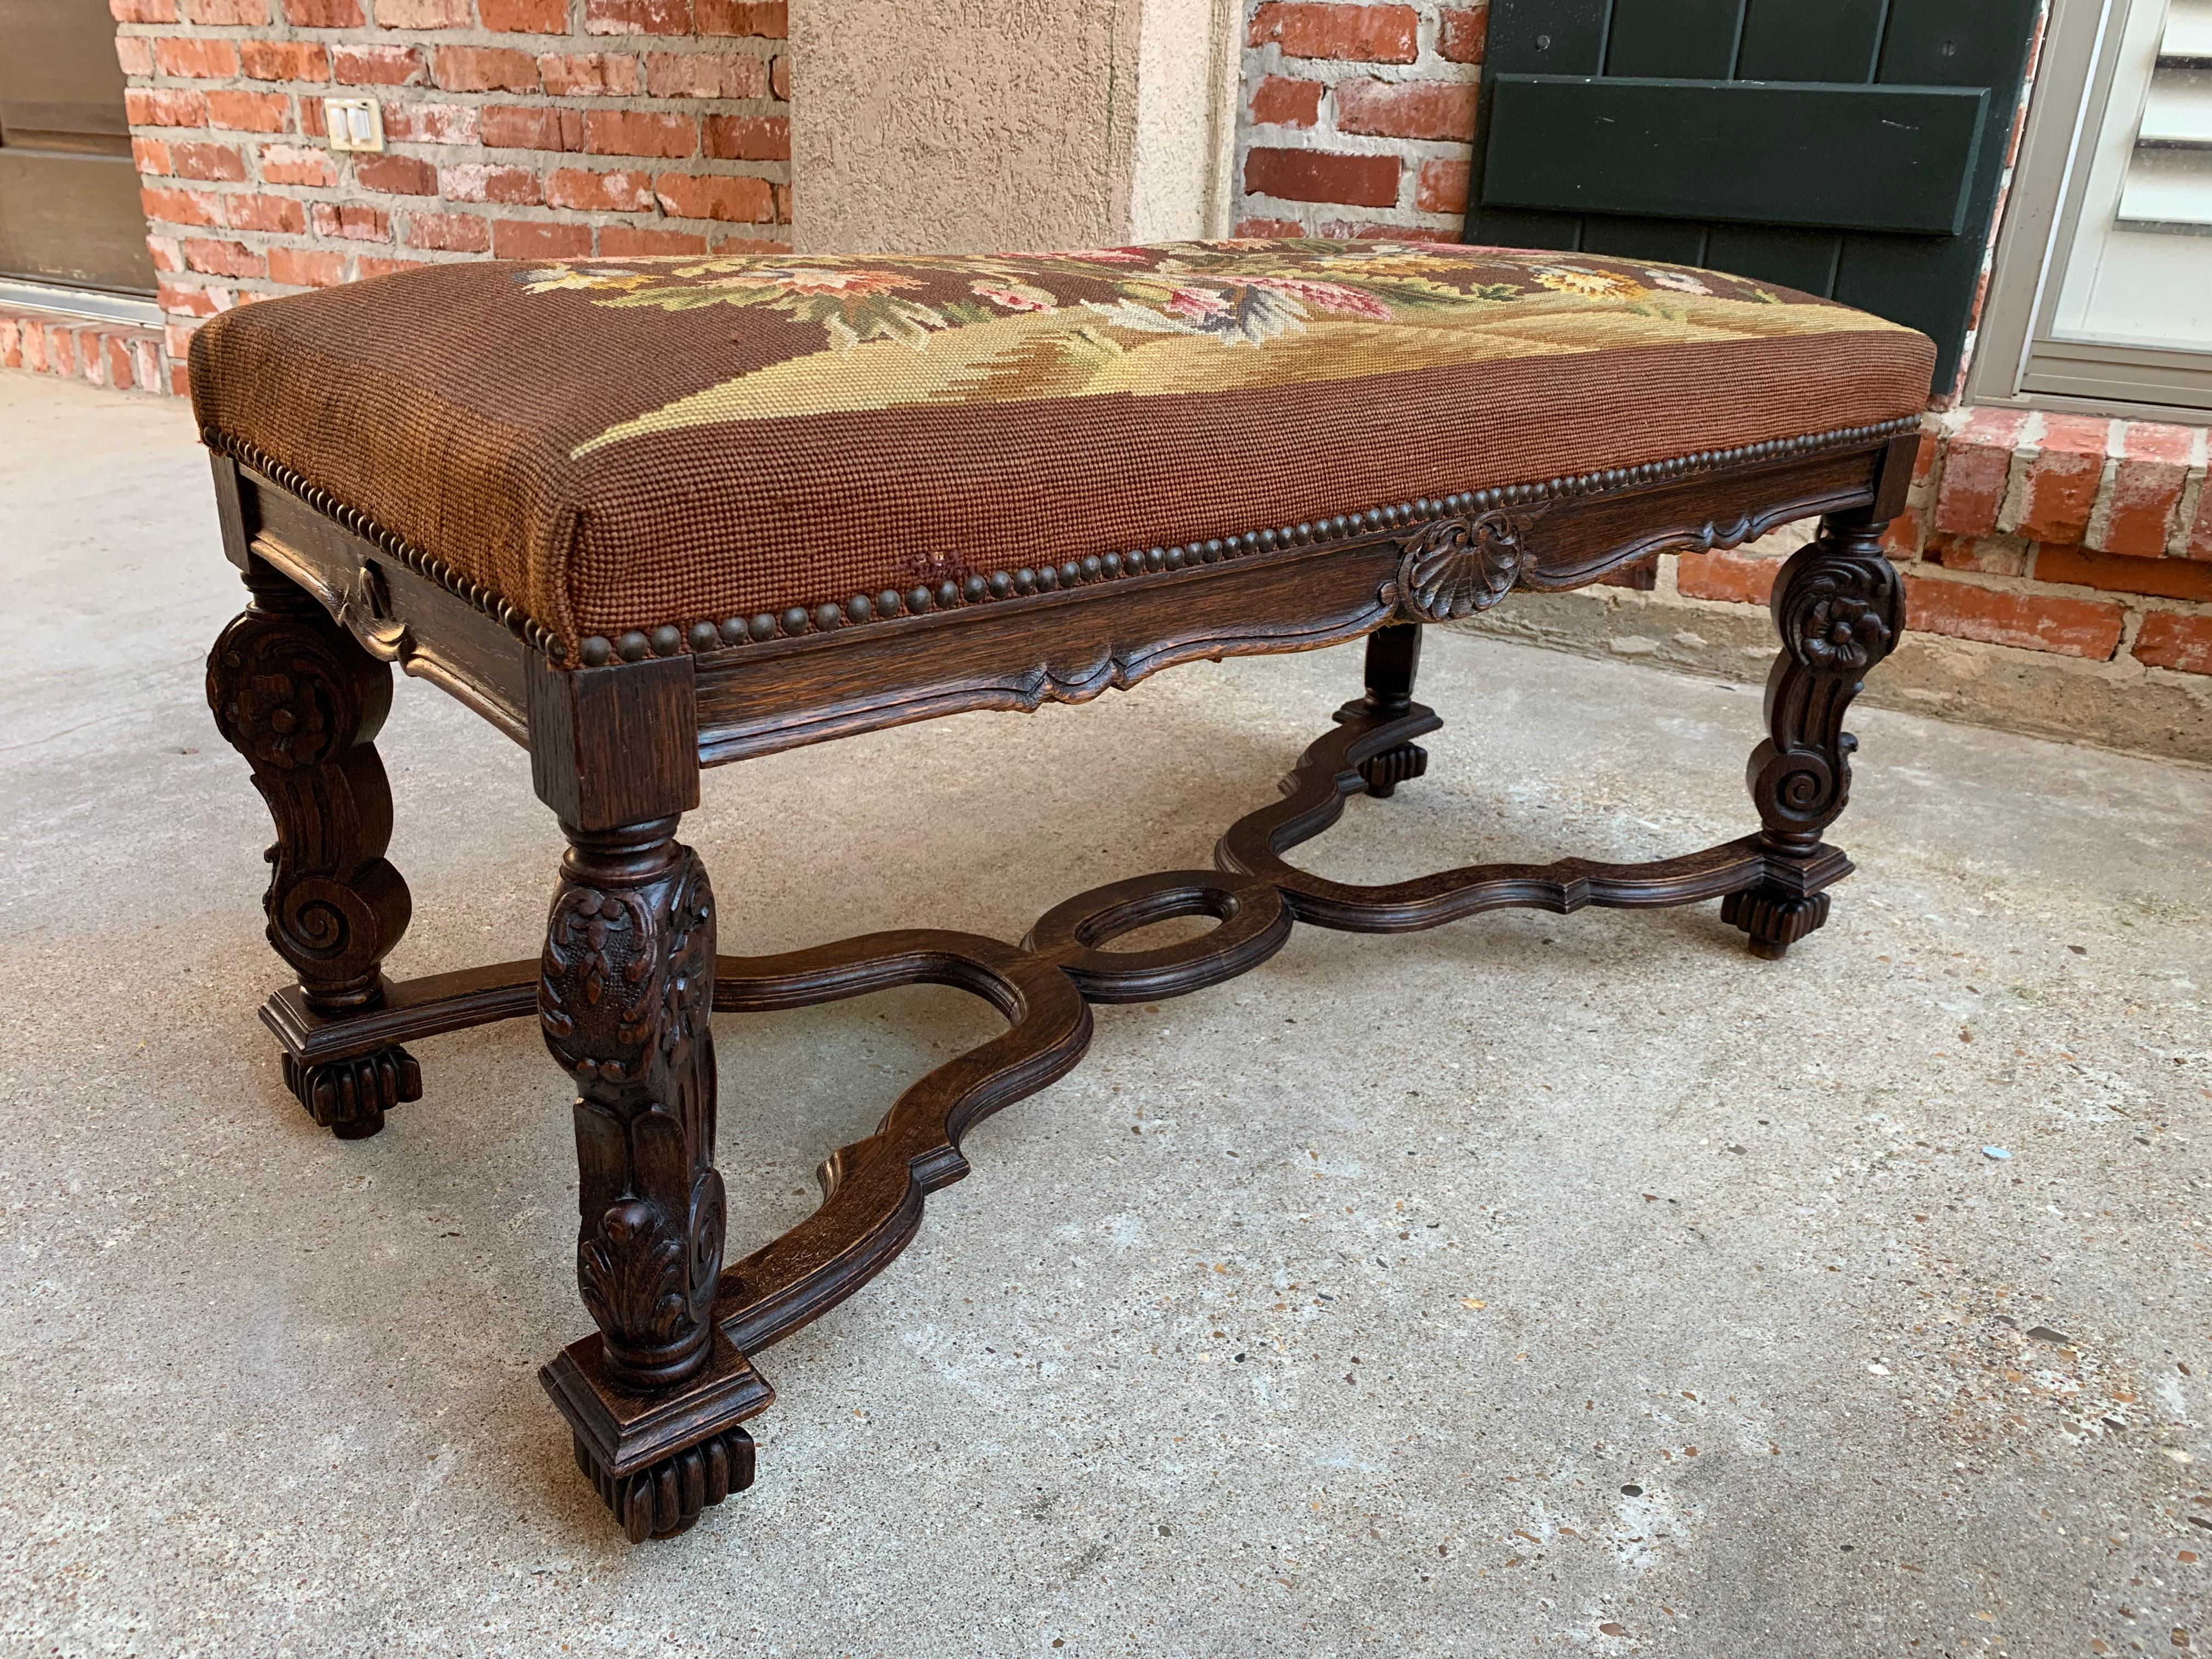 Direct from France, one of several great antique stools, tabourets, and benches from our most recent container!
~ Fabulous French Louis XV style with heavily carved legs and hand carved serpentine apron on all sides
~ Wide beveled serpentine cross